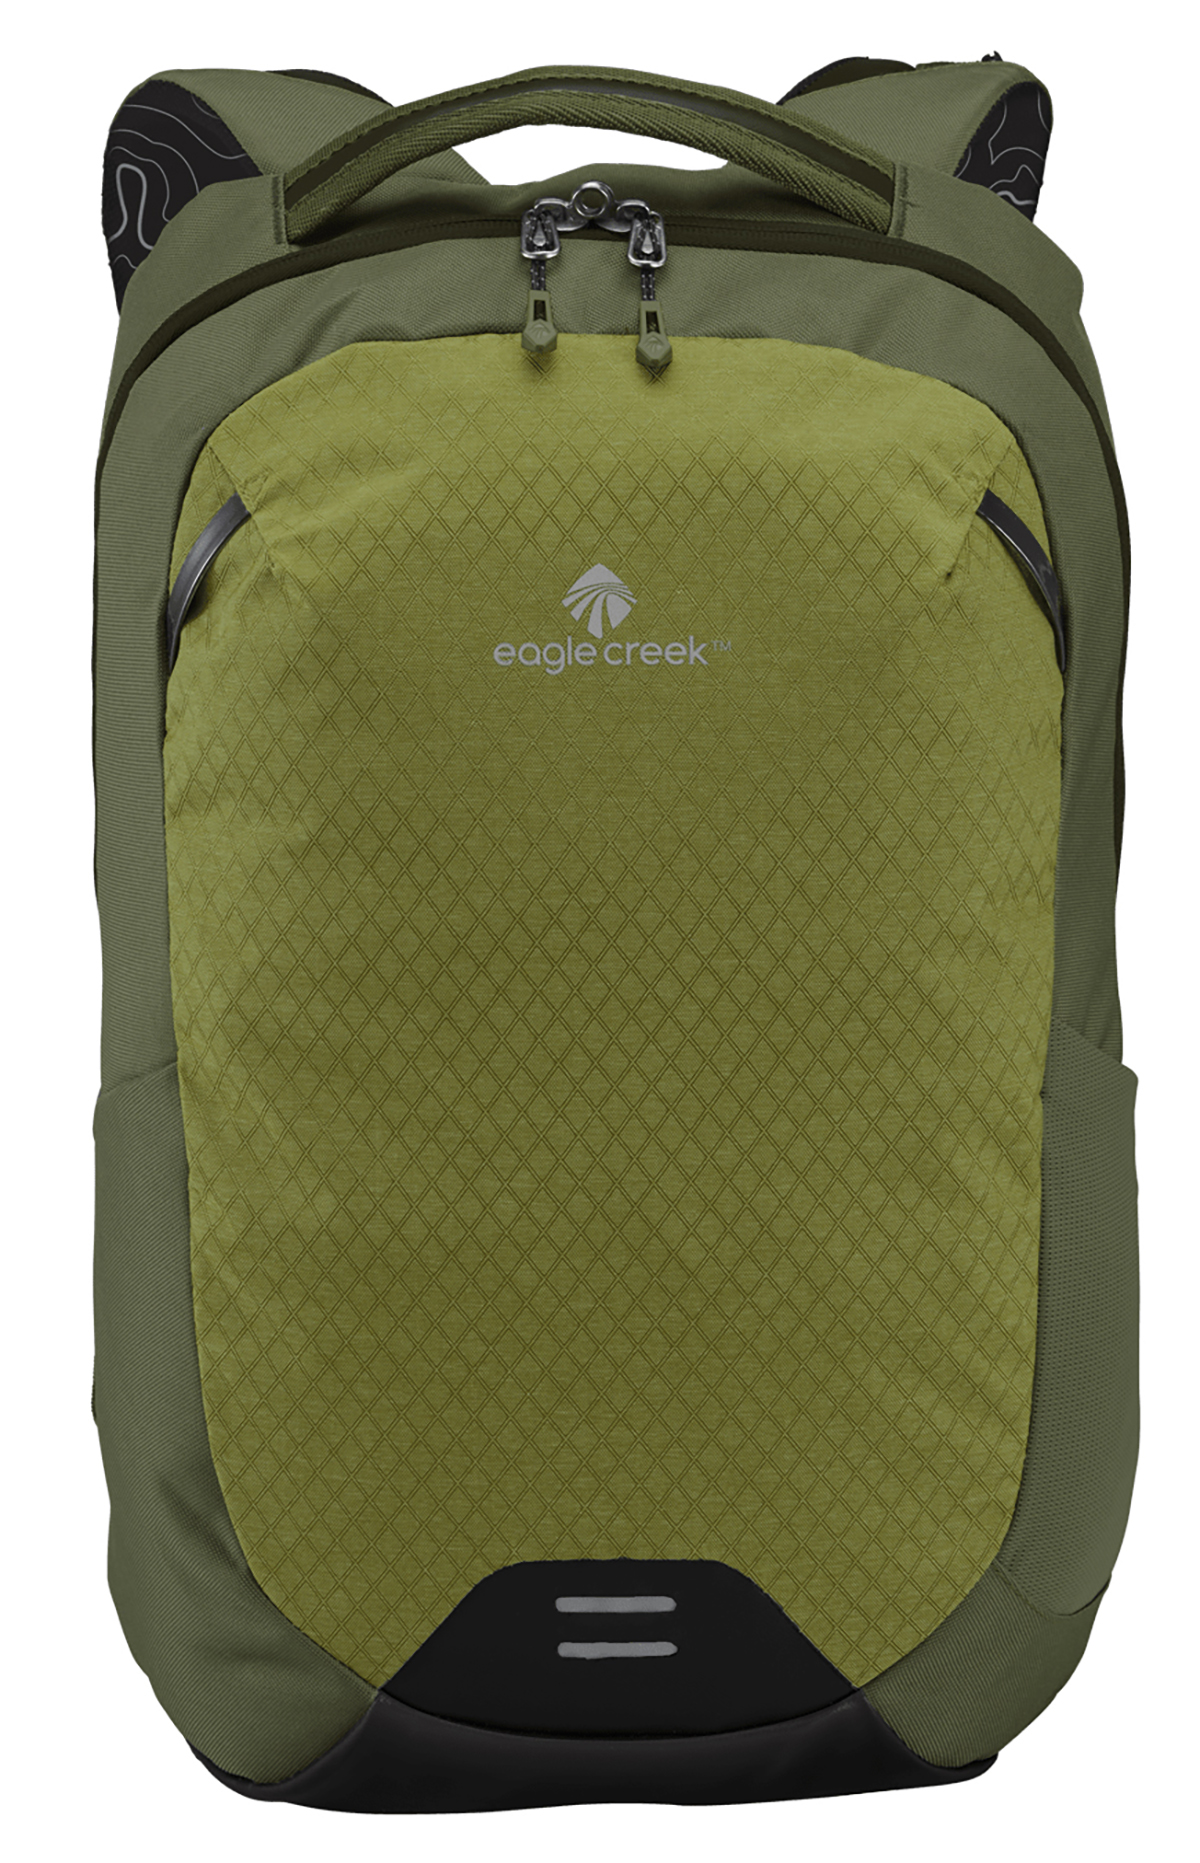 Eagle Creek Introduces All-New Wayfinder Backpack Collection